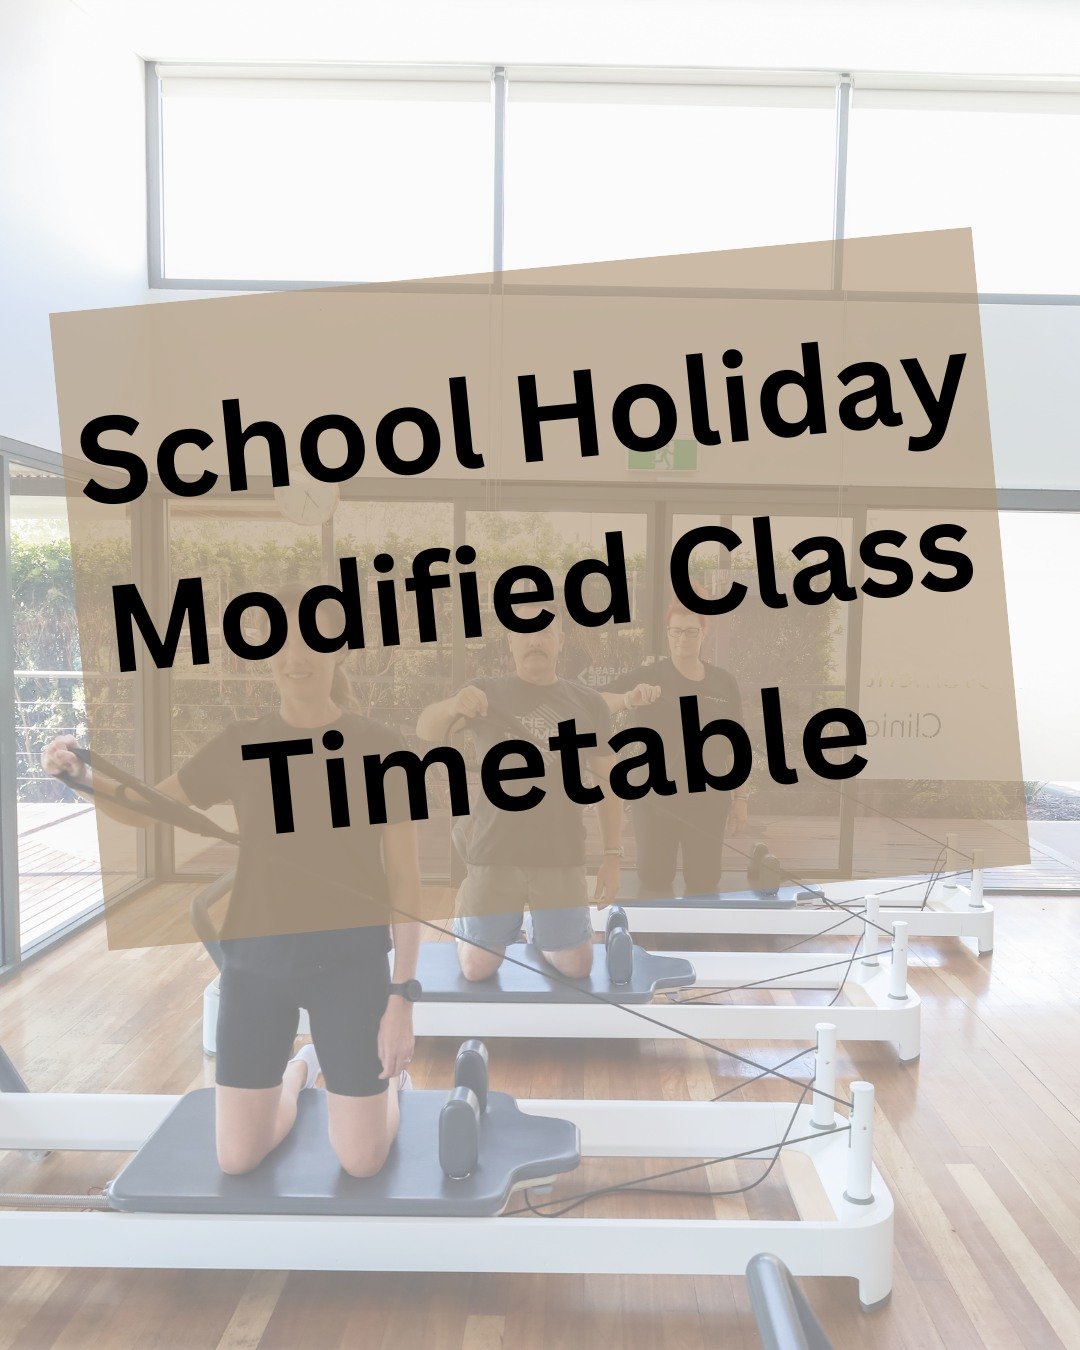 During school holidays our class timetable will be slightly modified. The class timetable will be updated on our booking app.

#dubbopilates #reformerstudio #classtimetable #dubbopilates